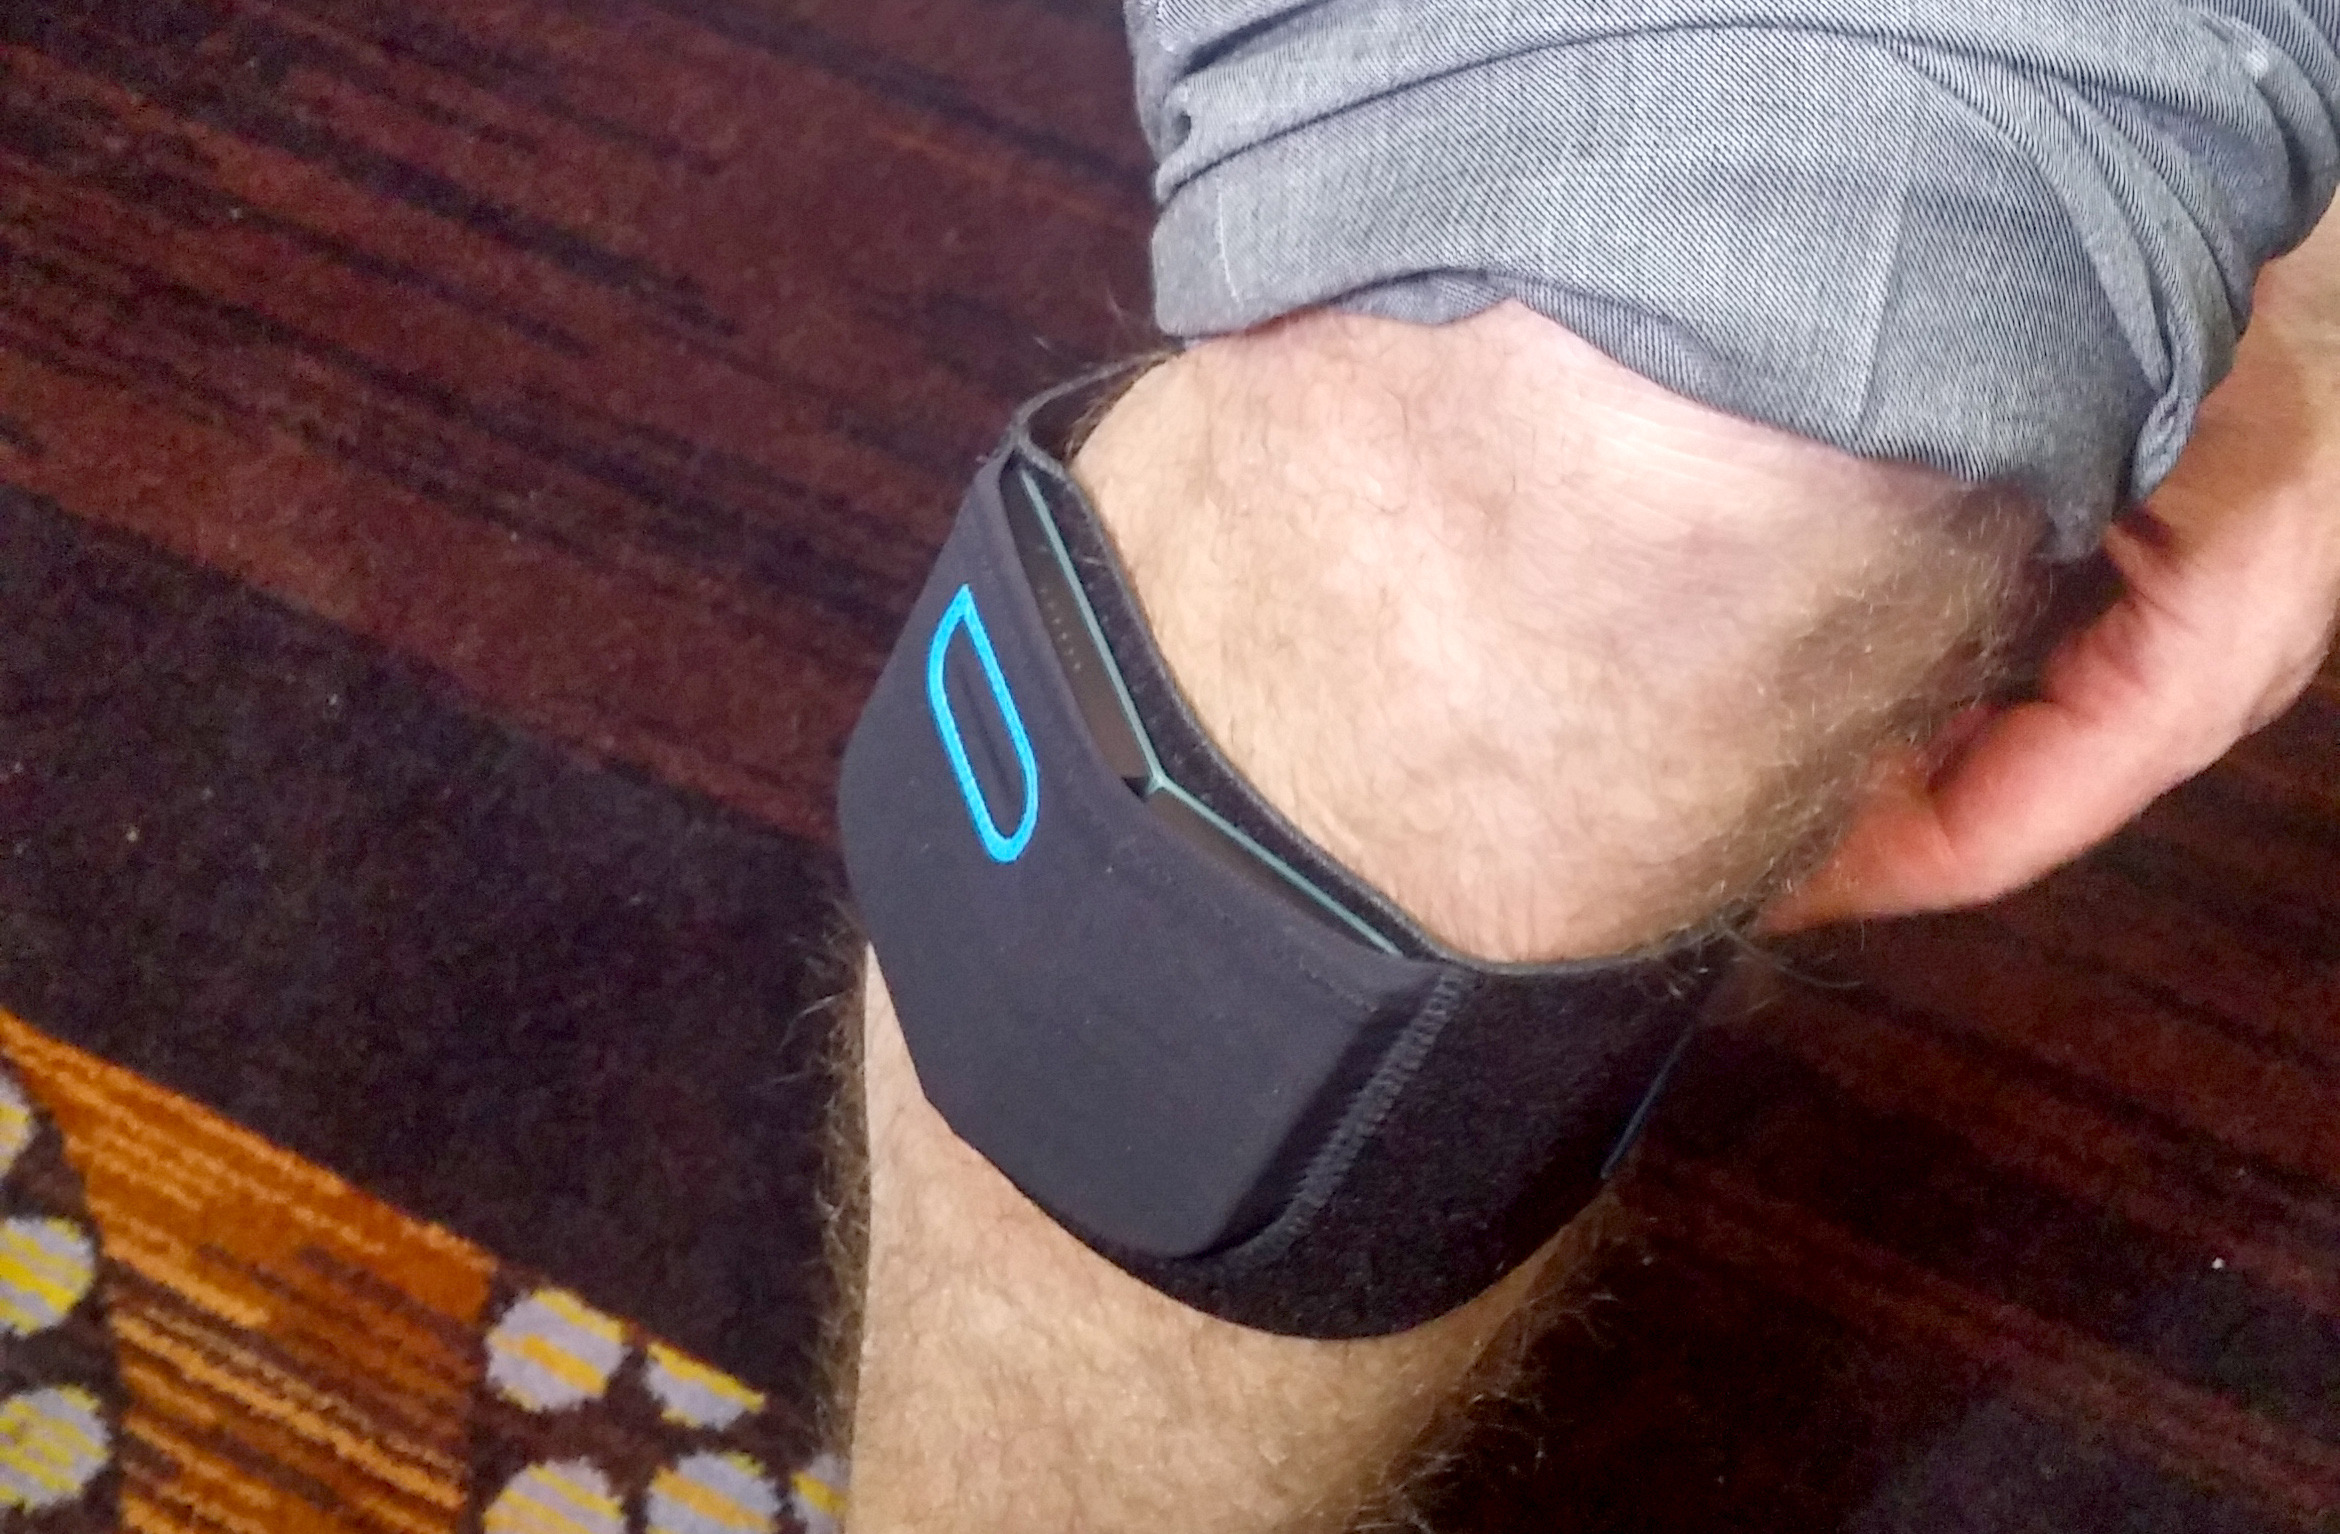 Wearable relieves pain while active or sleeping